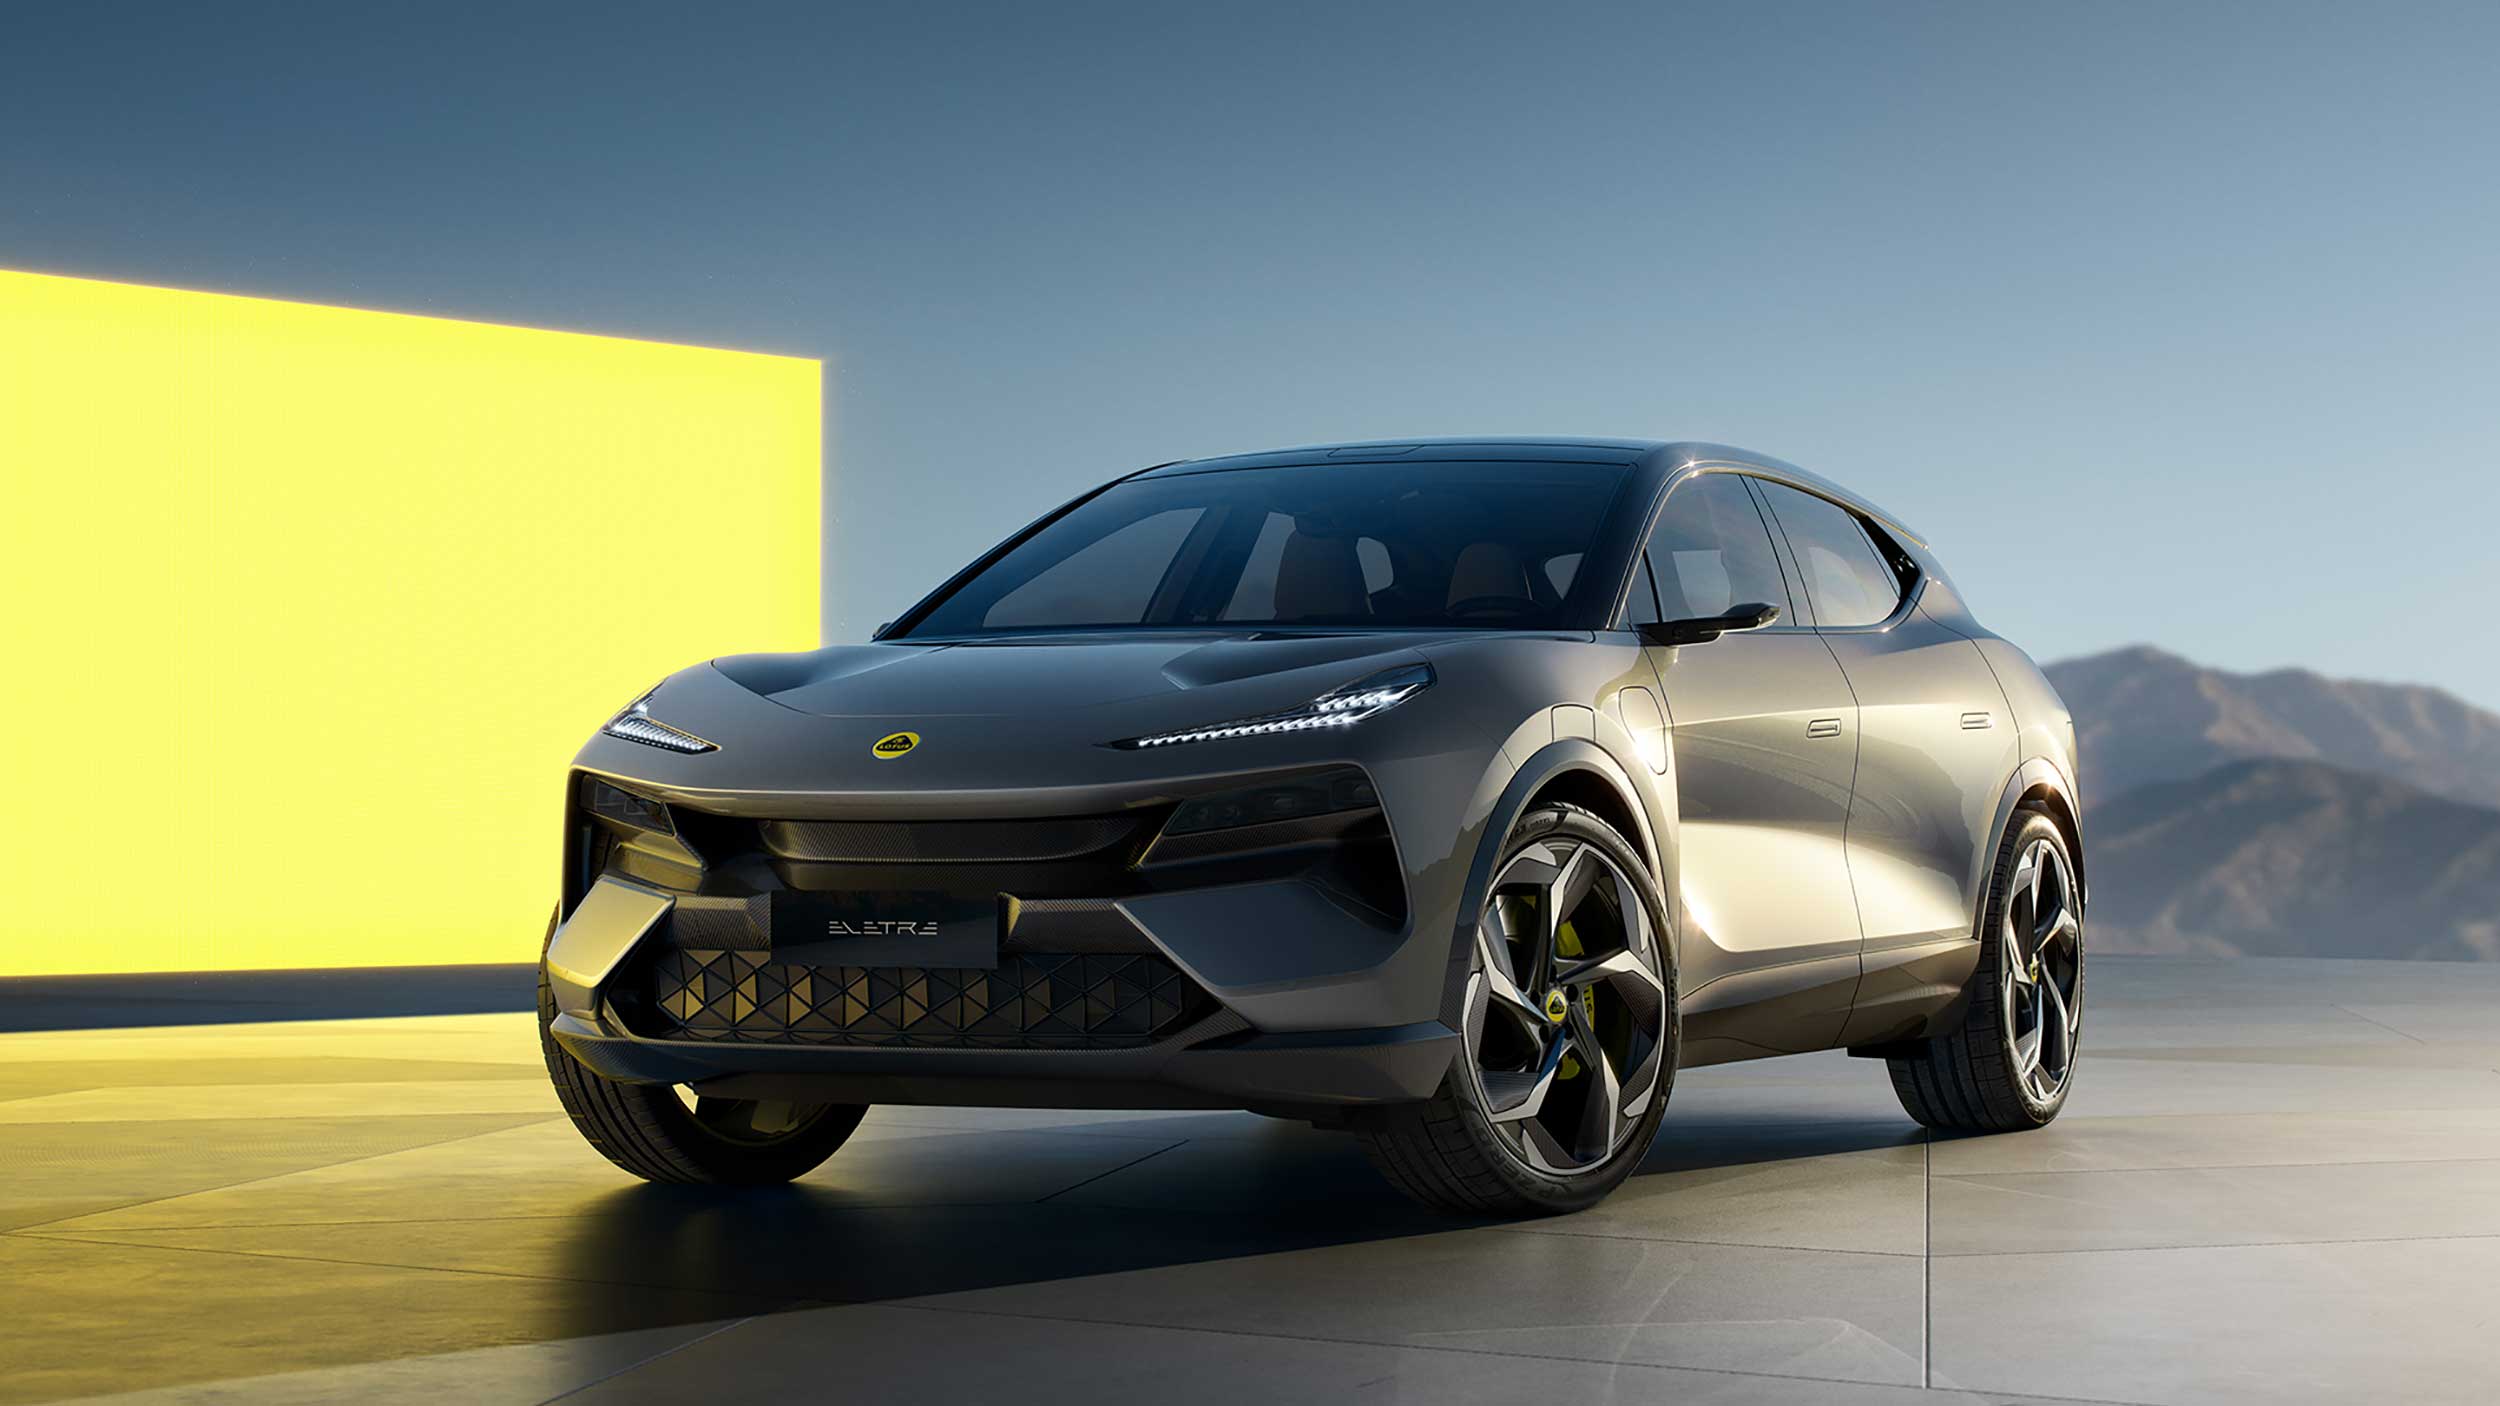 Lotus is the latest to show off a high-powered electric sedan—the Emeya